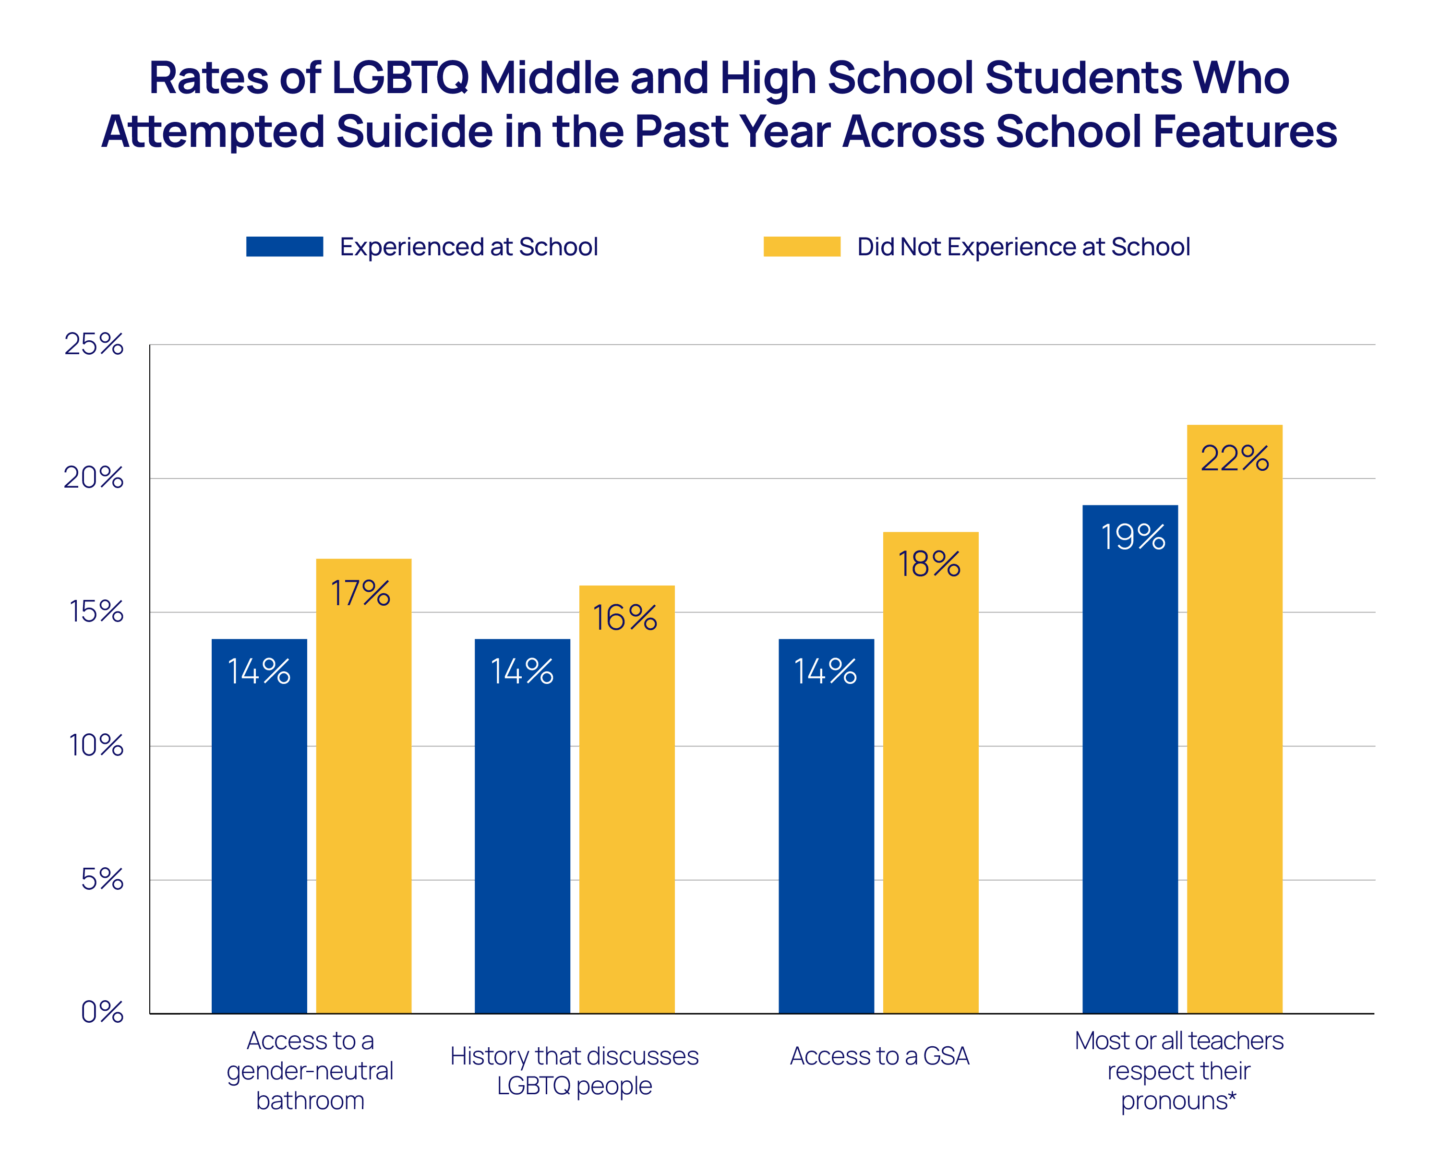 Rates of LGBTQ Middle and High School Students Who Attempted Suicide in the Past Year Across School Features Bar Chart